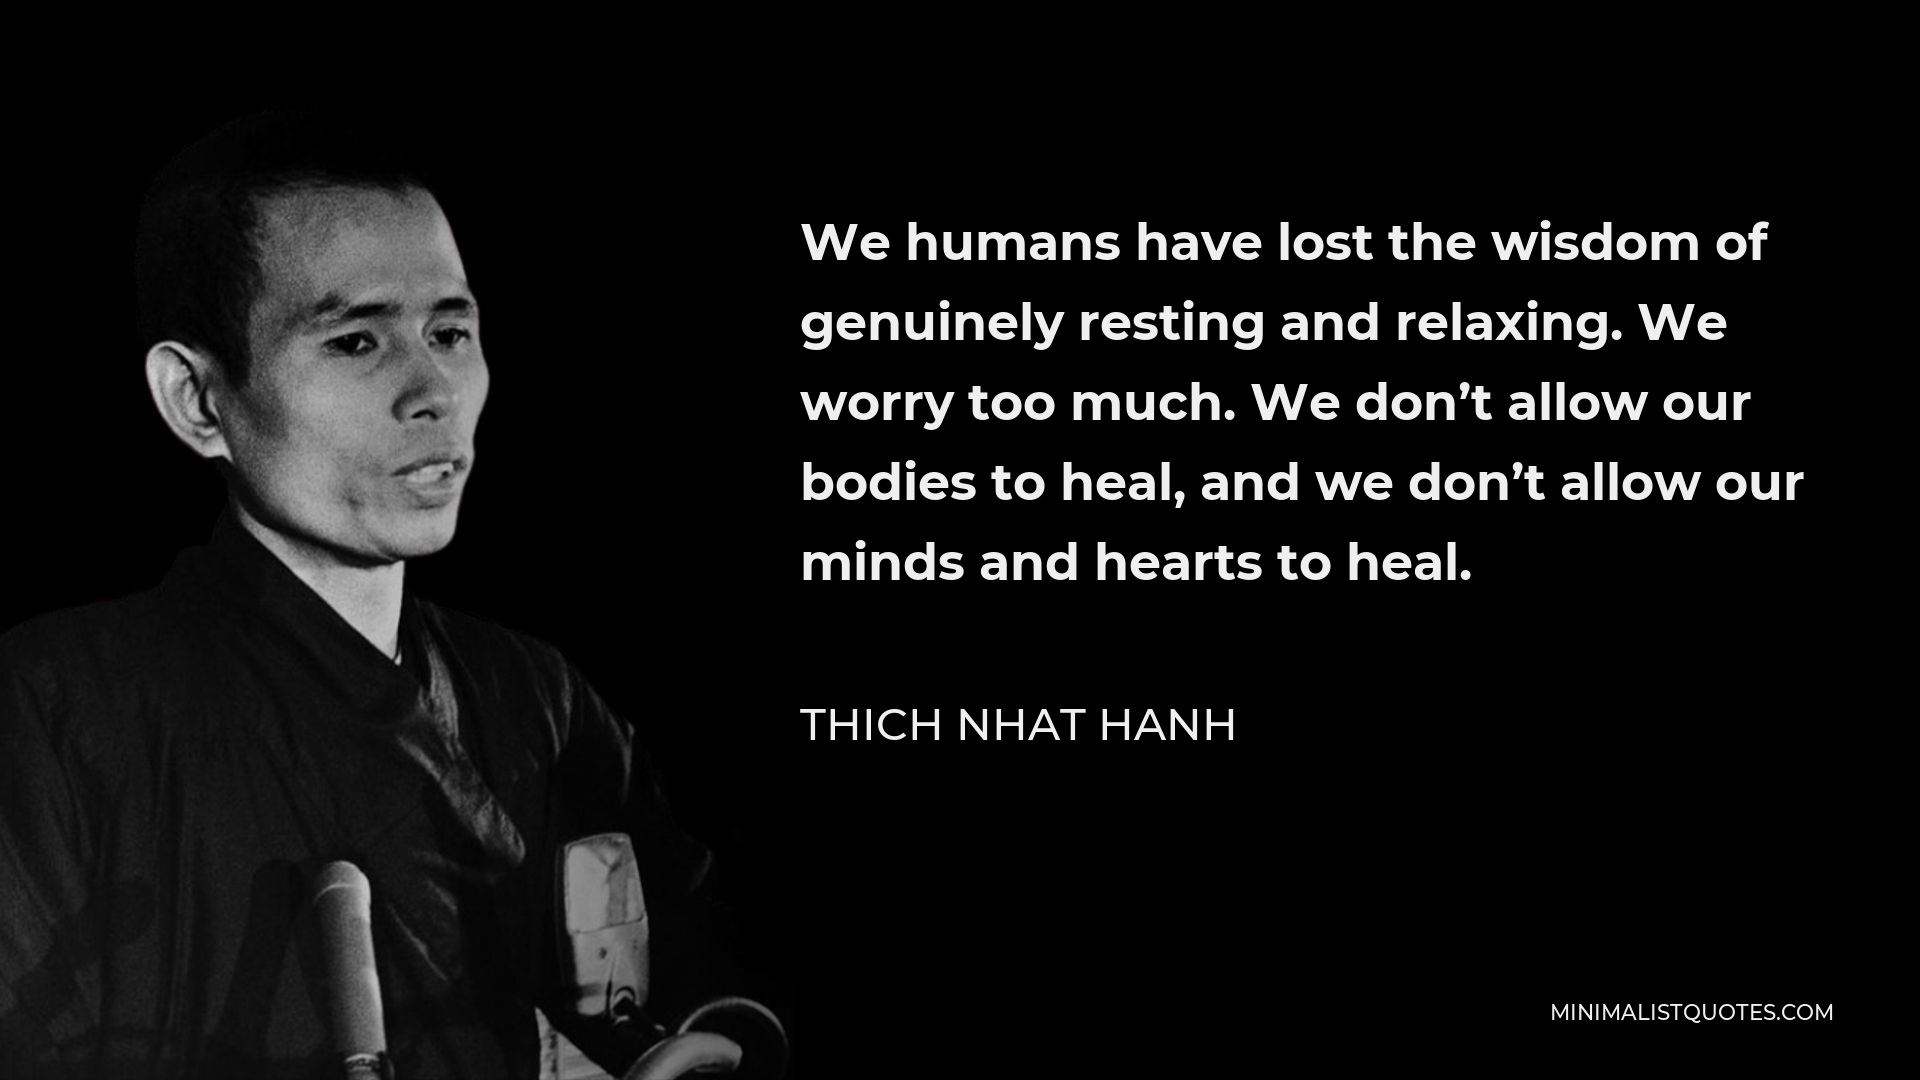 Thich Nhat Hanh Quote - We humans have lost the wisdom of genuinely resting and relaxing. We worry too much. We don’t allow our bodies to heal, and we don’t allow our minds and hearts to heal.